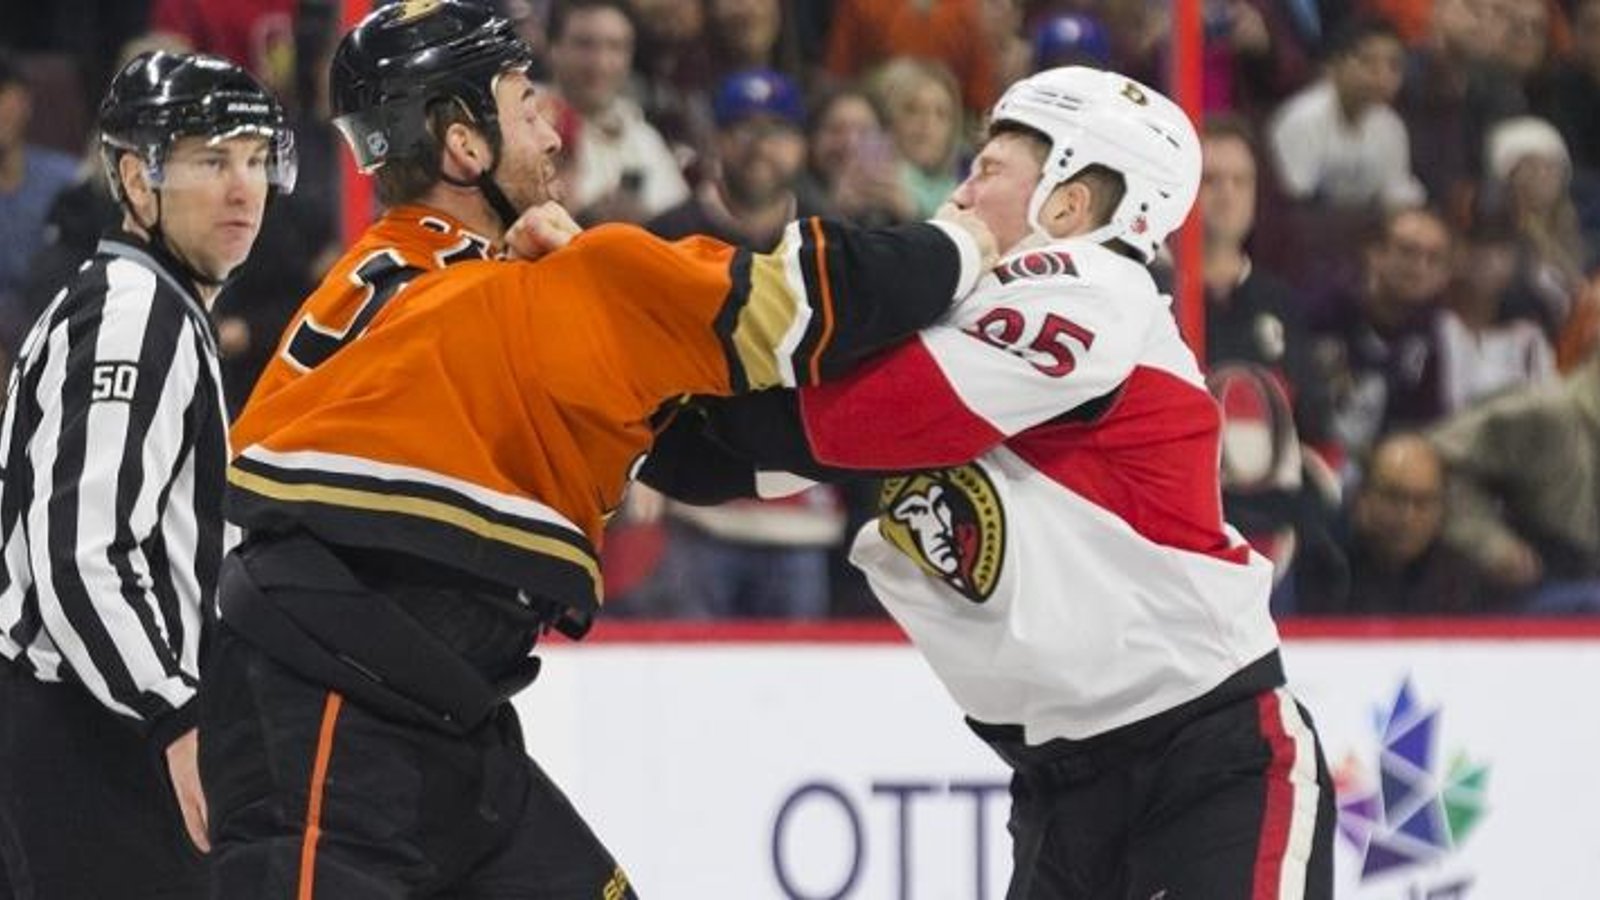 Breaking: First signs of potential anti-fighting rule changes coming to the NHL.